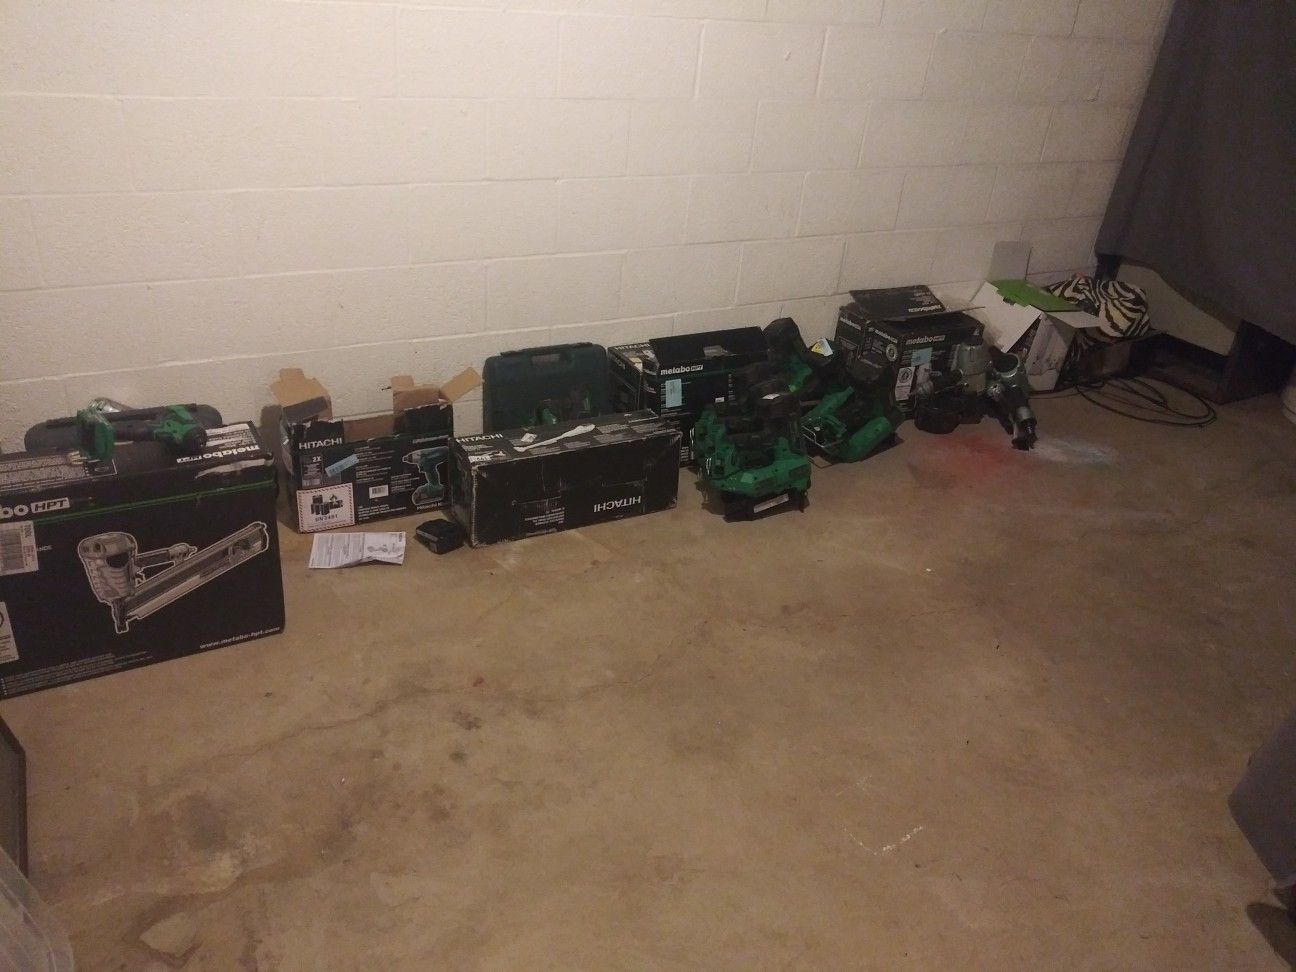 Hitachi power tools - new and used! Make an offer!